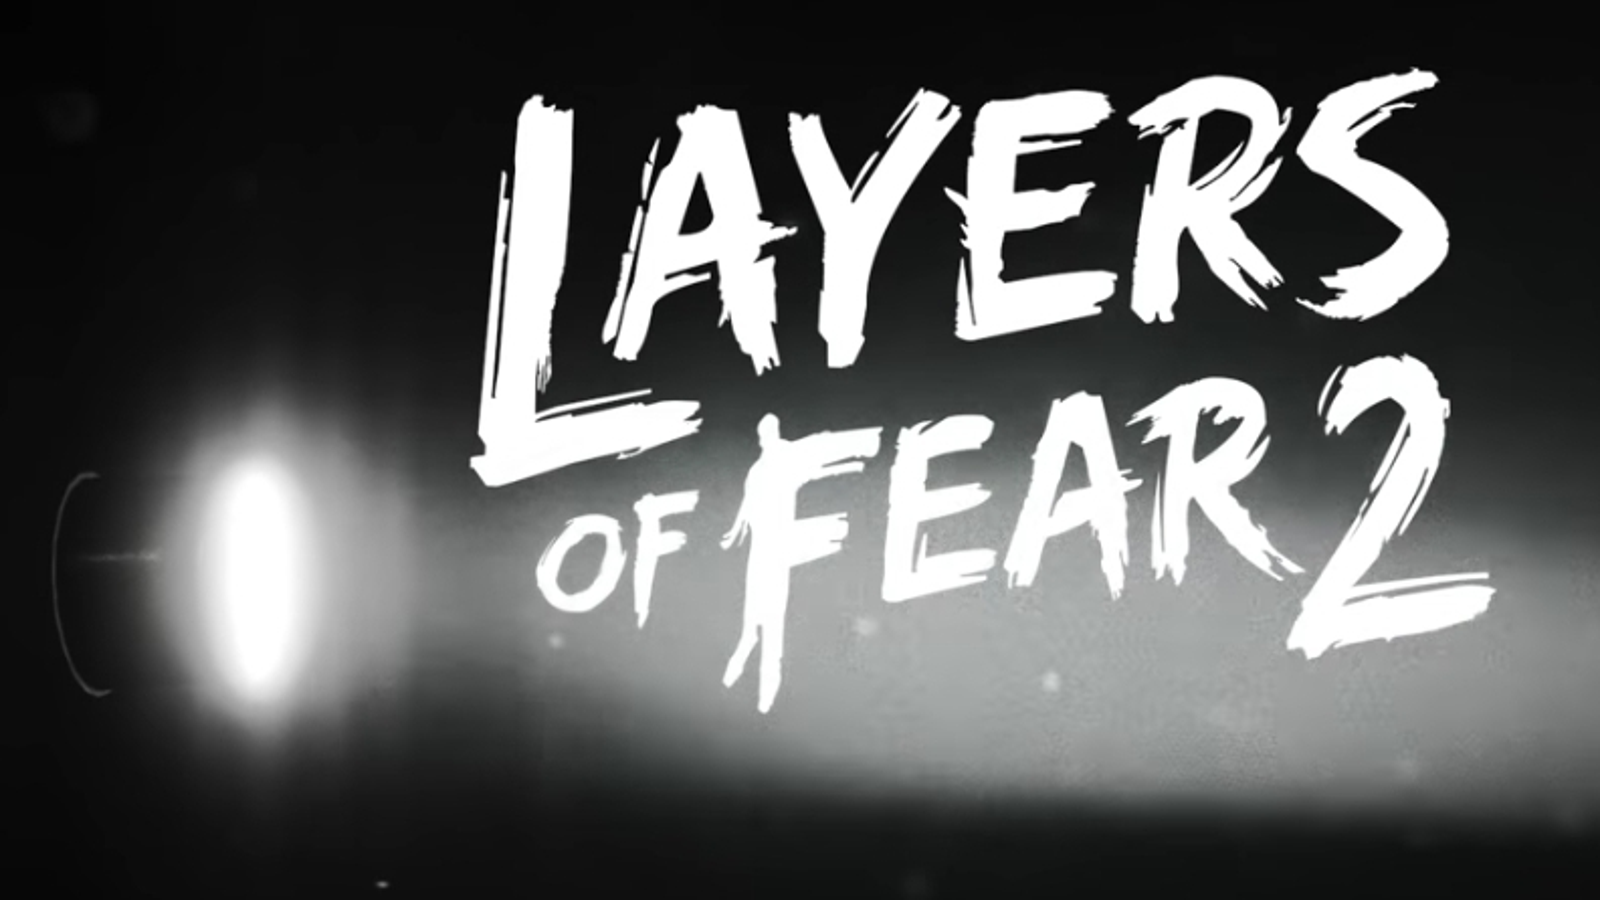 Layers of Fear 2 on